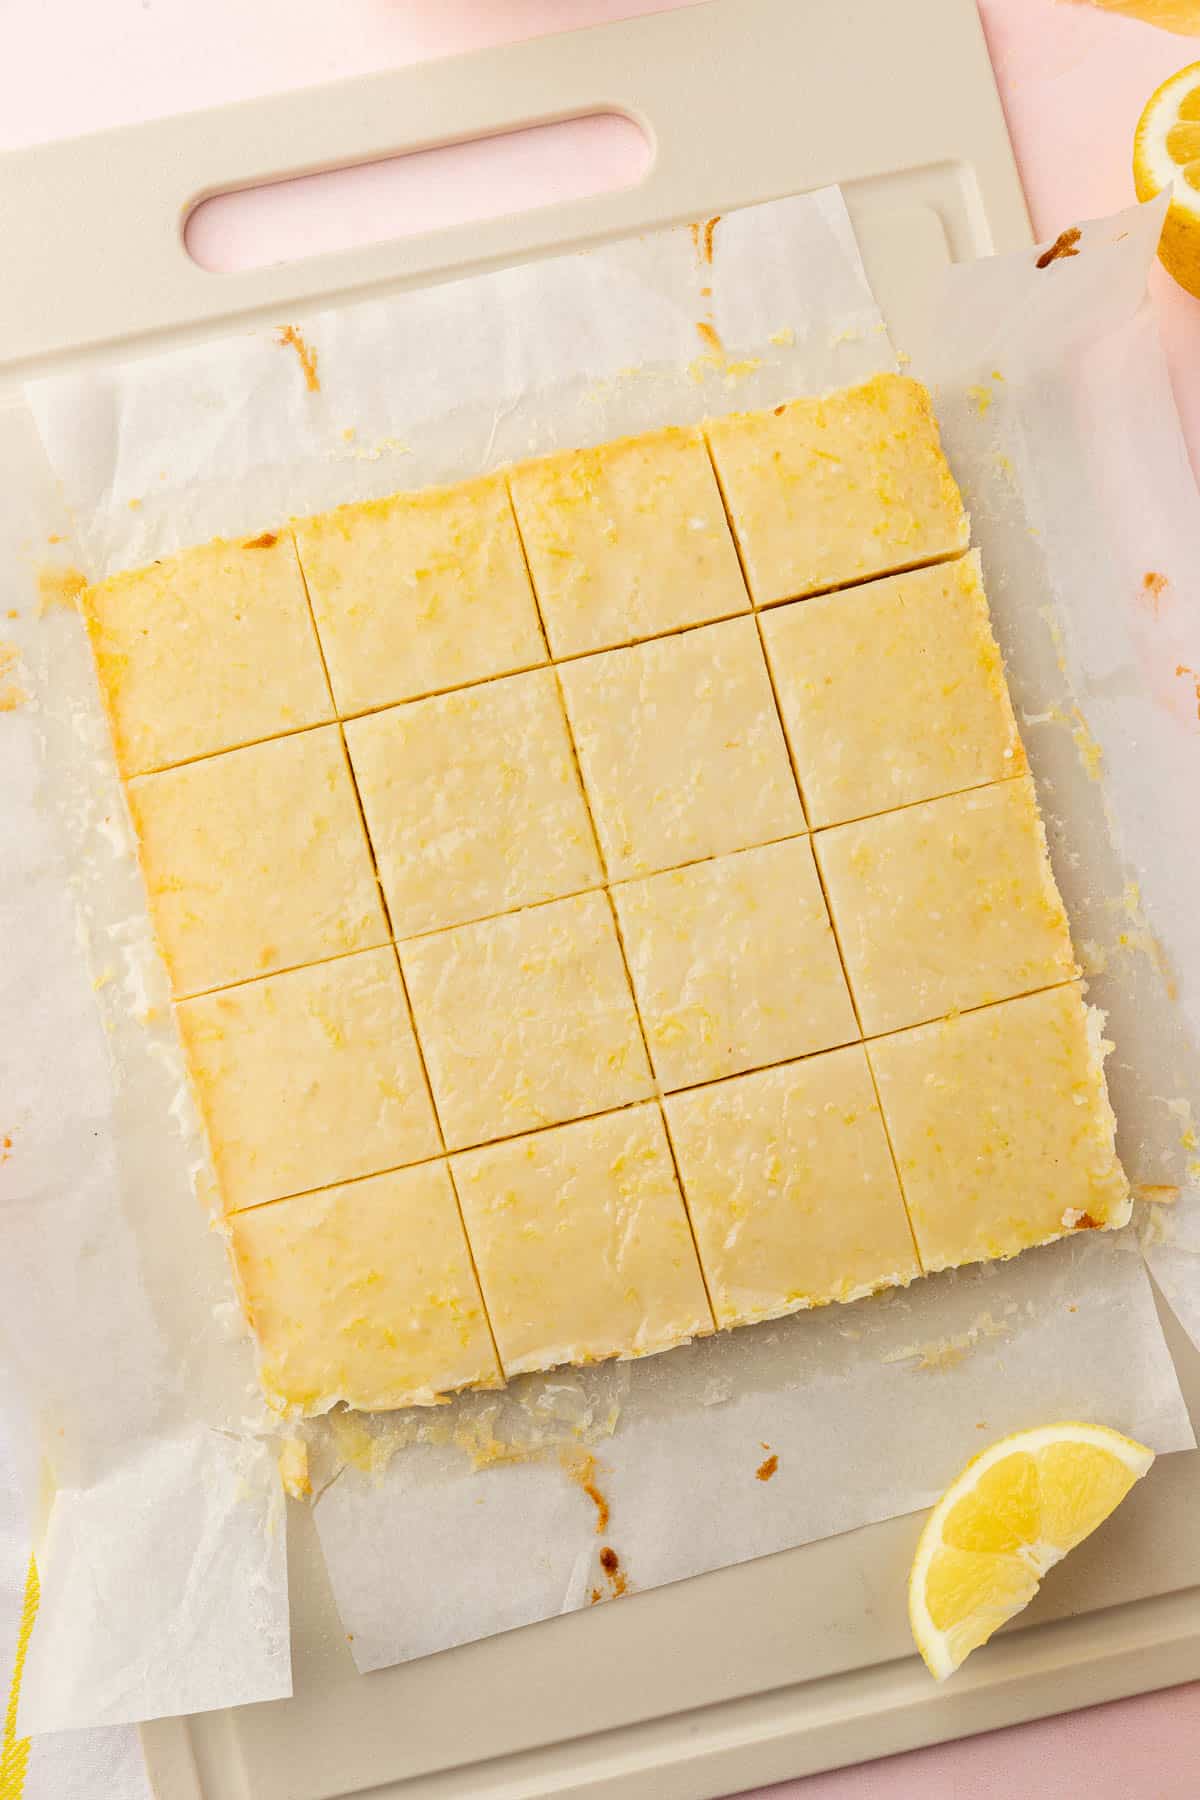 Lemon brownies on a cutting board that have been cut into 16 equal pieces.